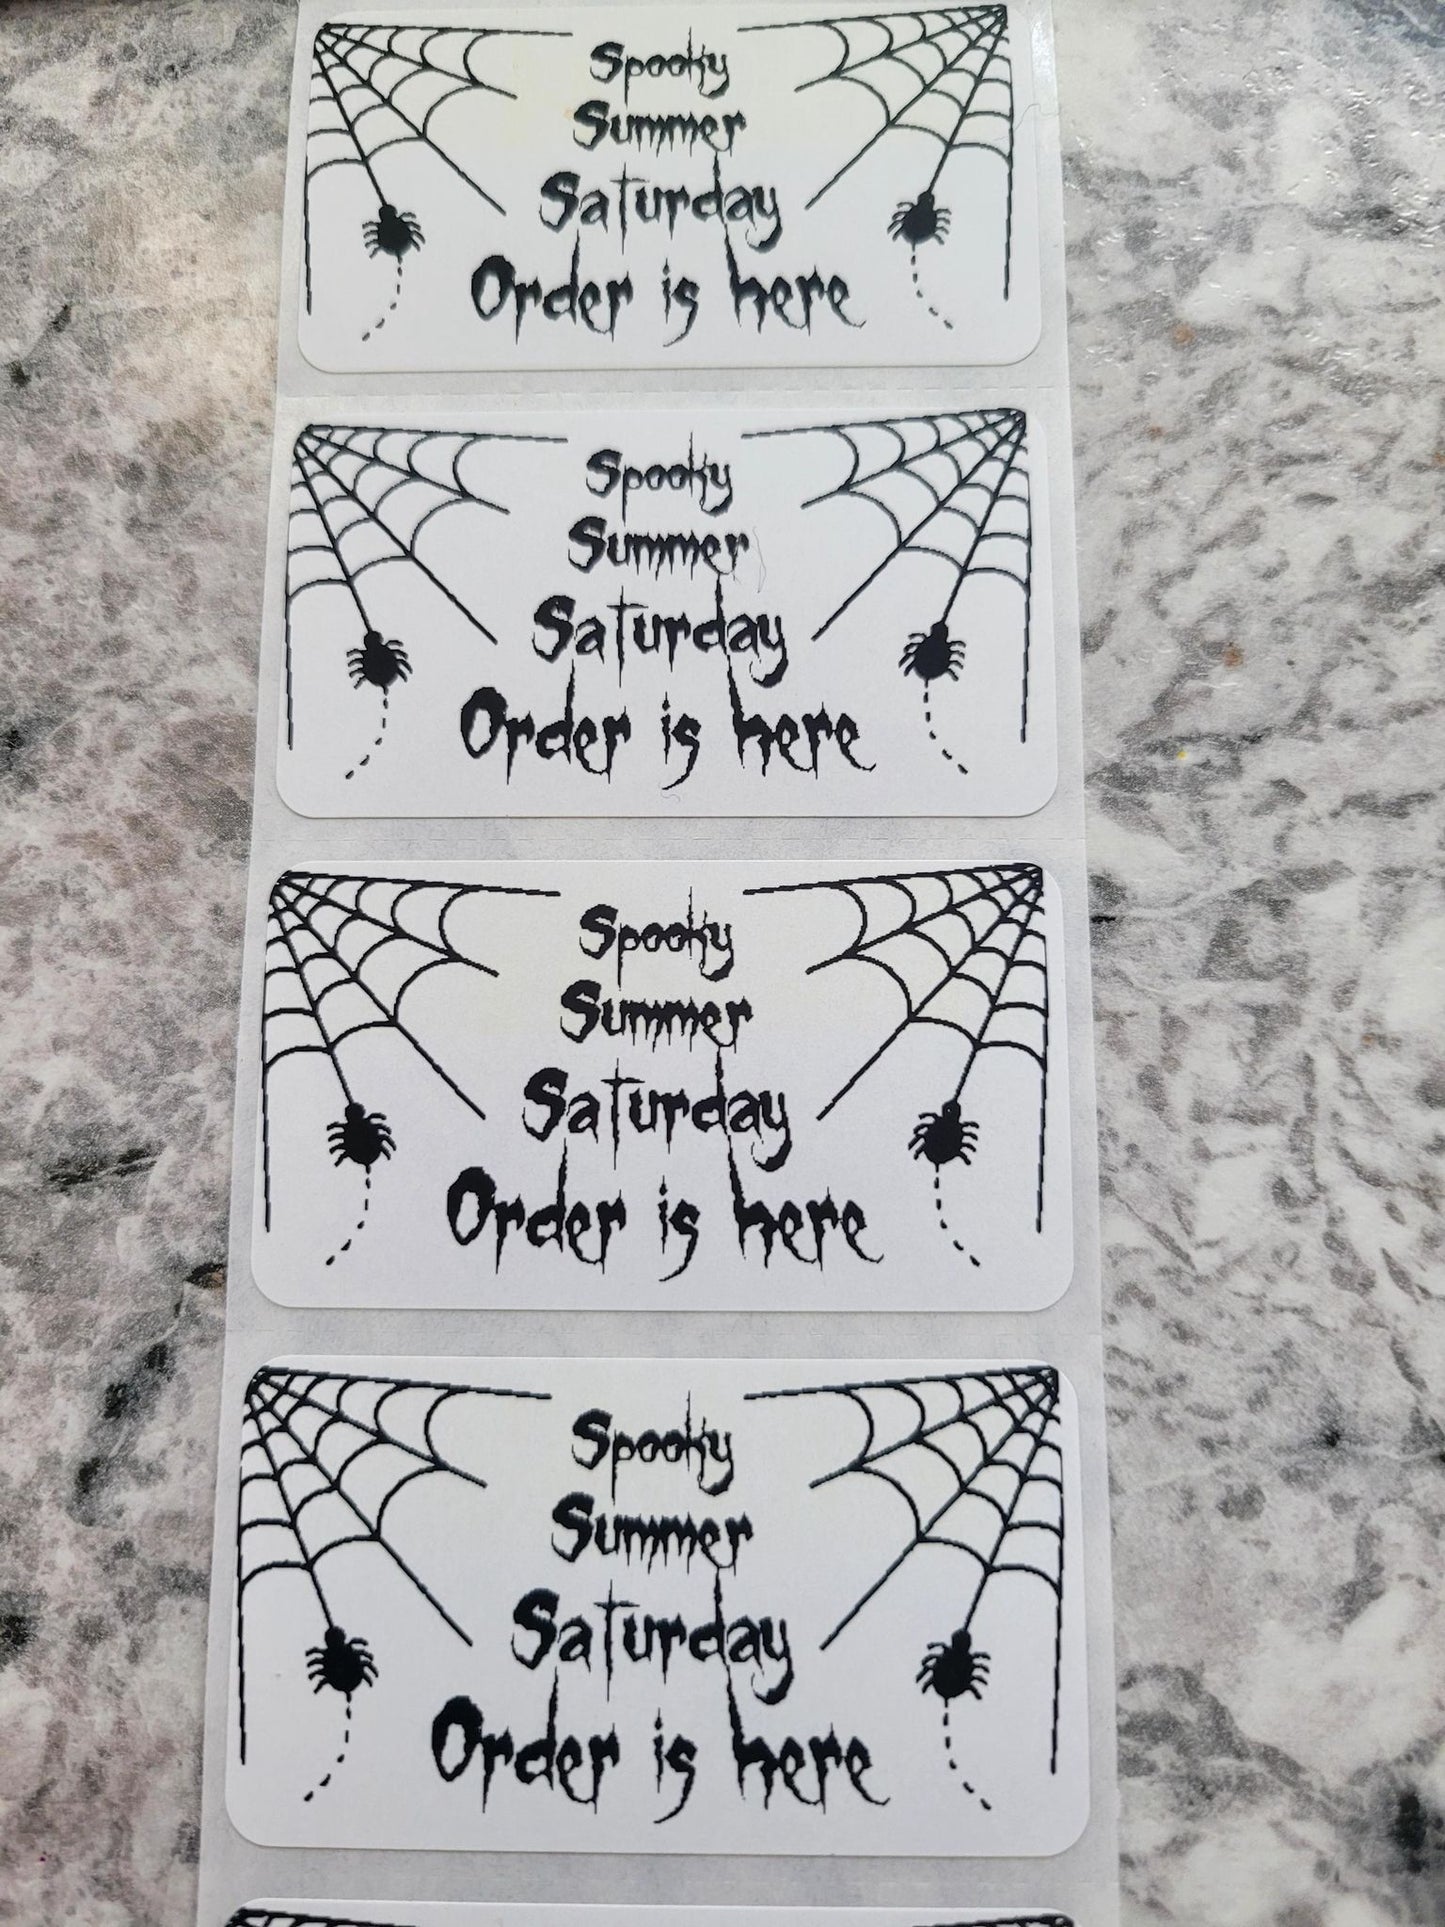 Spooky summer Saturday order is here Halloween 50 OR 100 count